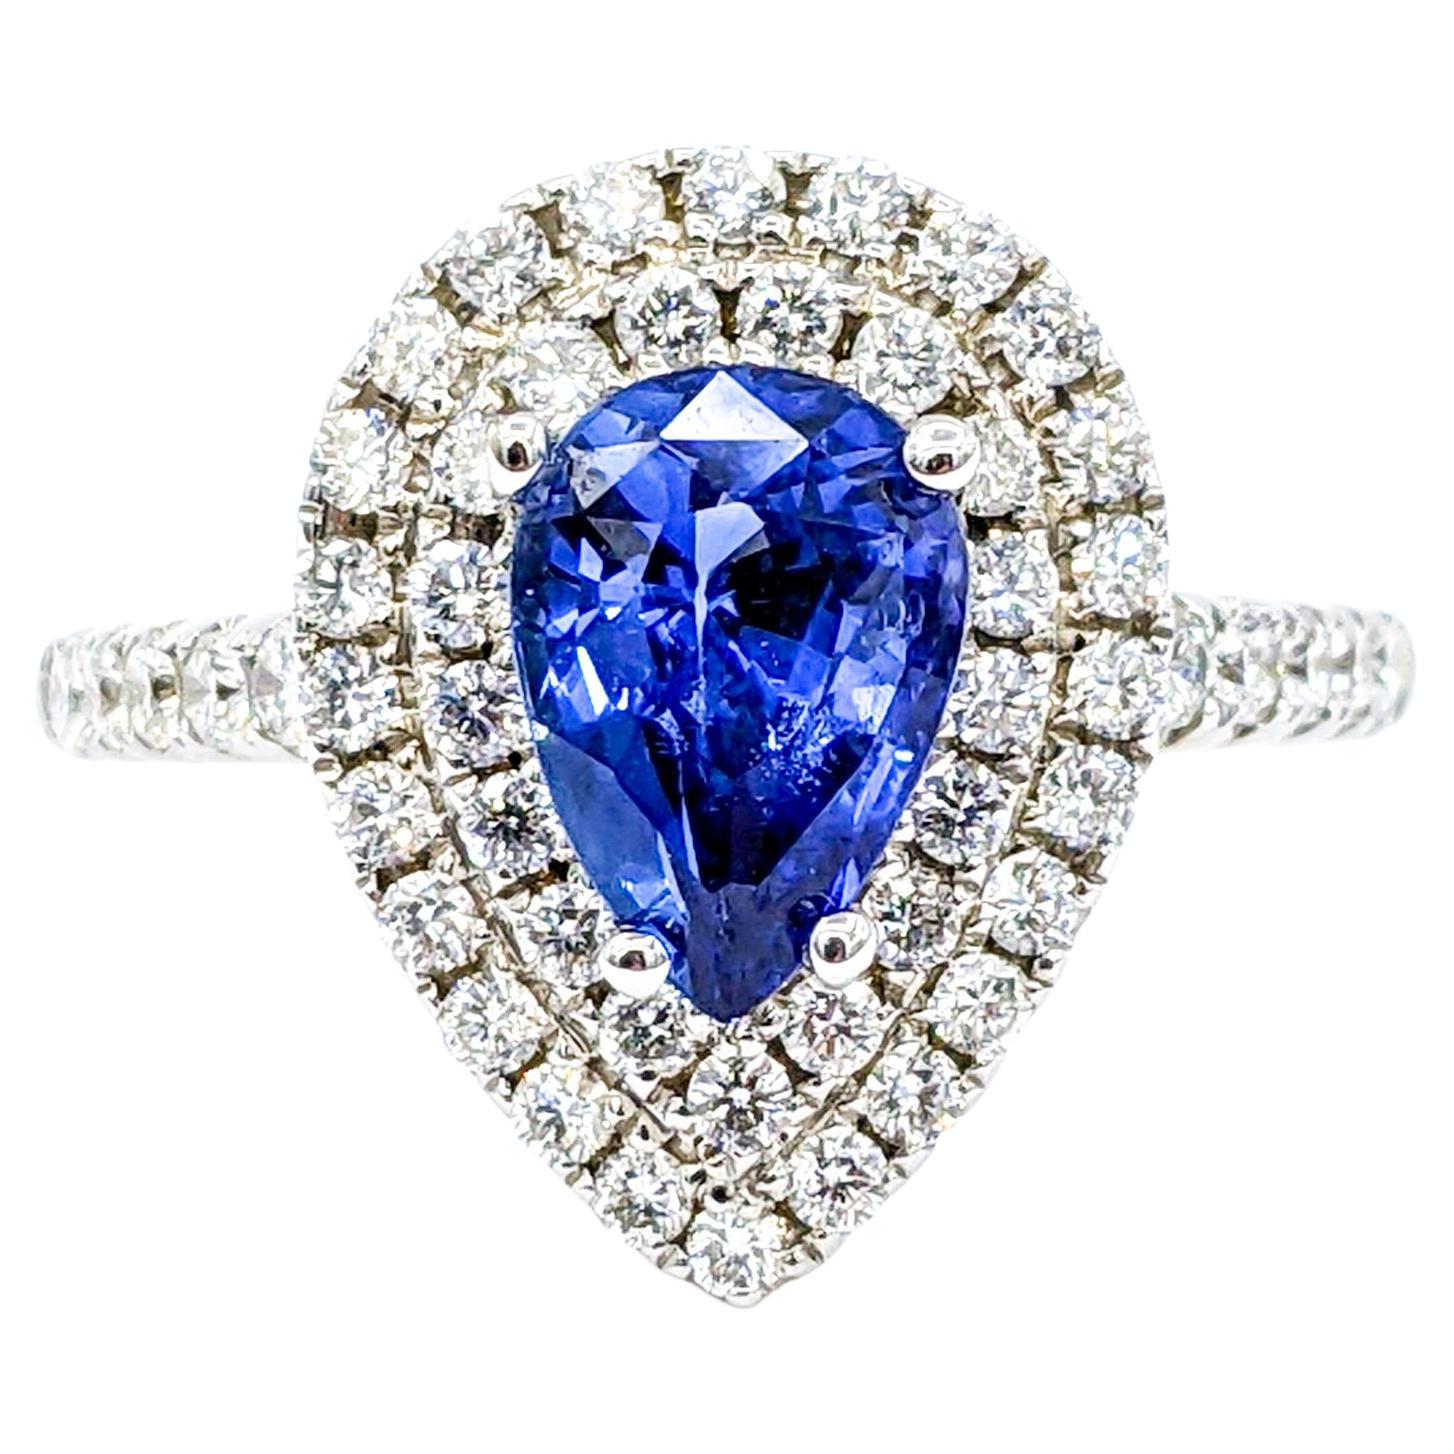 Stunning 2.00ct Sapphire & Diamond Cocktail Ring - 18K White Gold For Sale